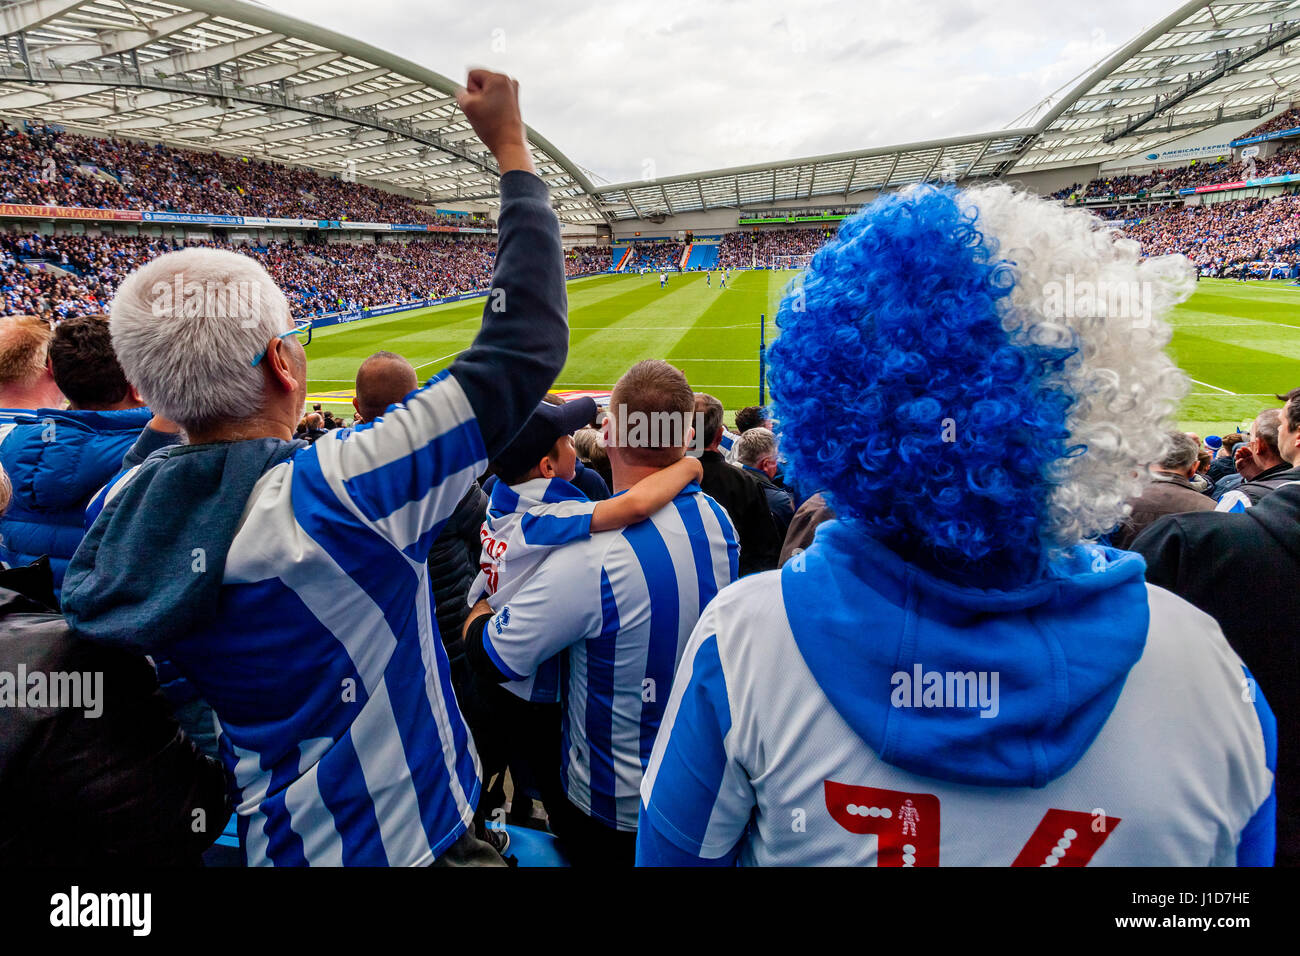 Brighton and Hove Albion Supporters Watch Their Team Play At Home At The Amex Stadium, Brighton, Sussex, UK Stock Photo